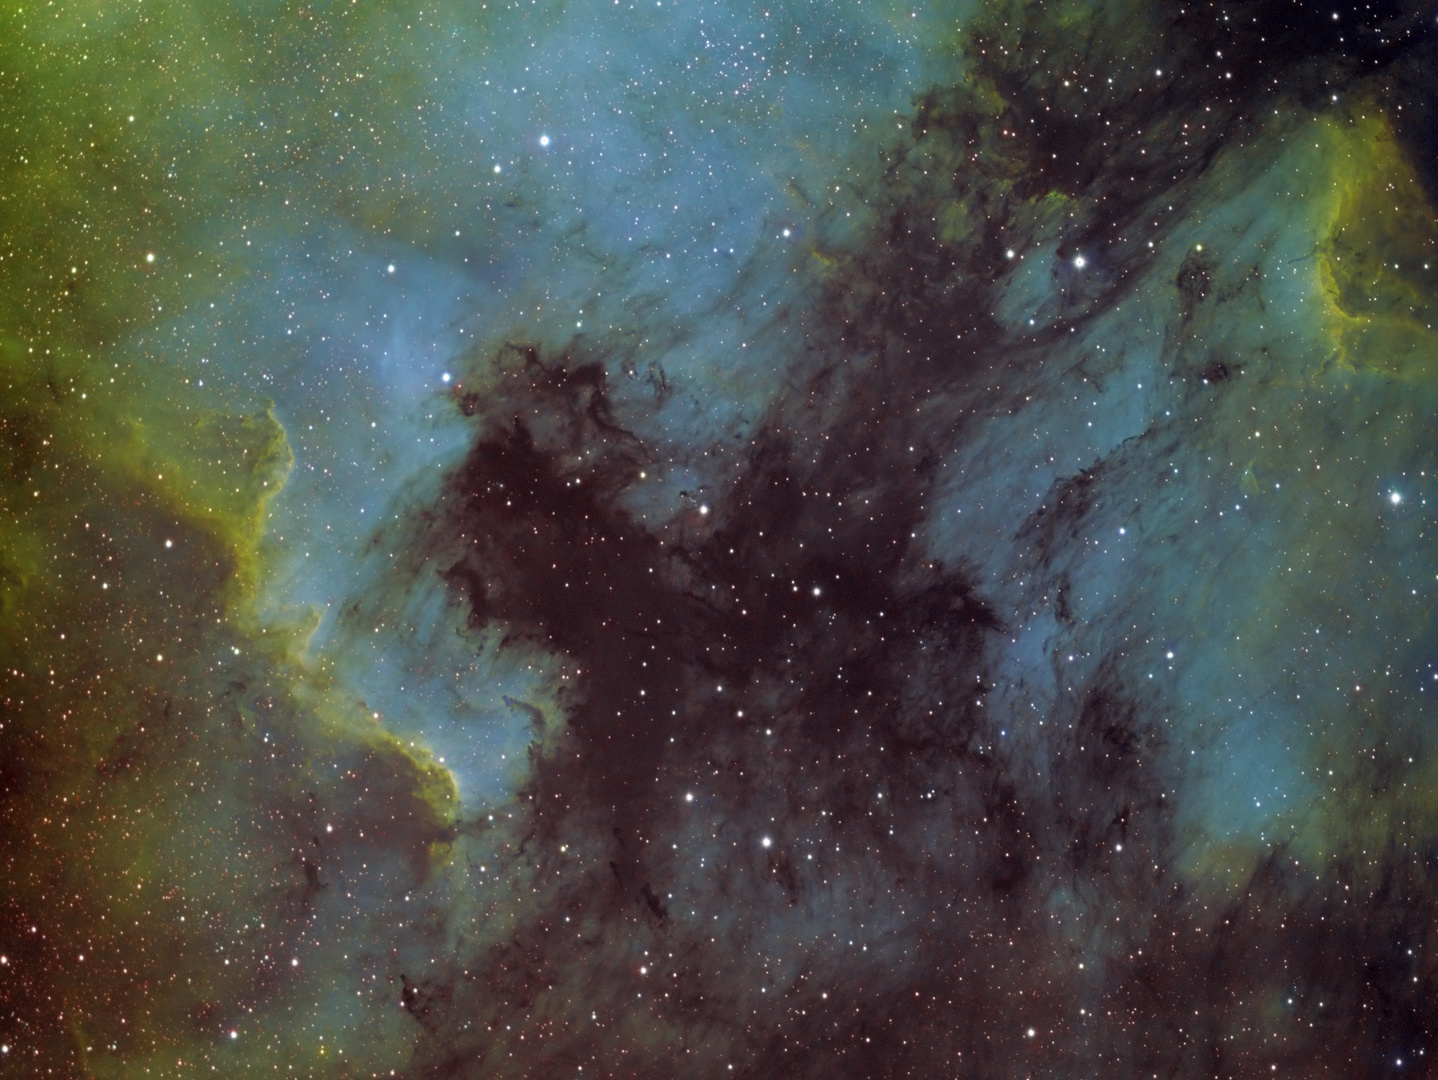 NGC7000 - IC5070 in Hubblepalette